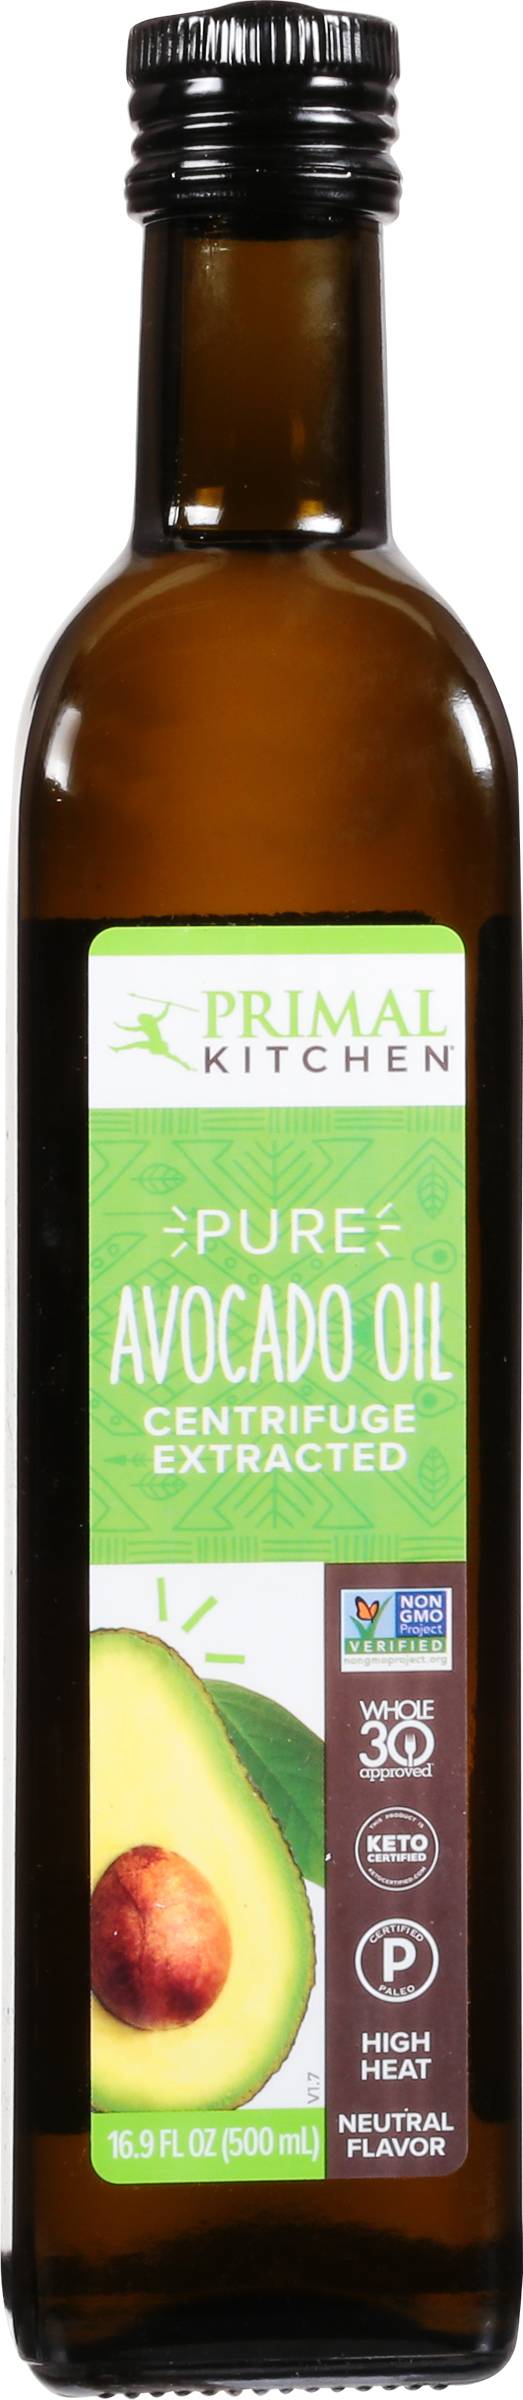 Primal Kitchen Pure Avocado Oil Centrifuge Extracted